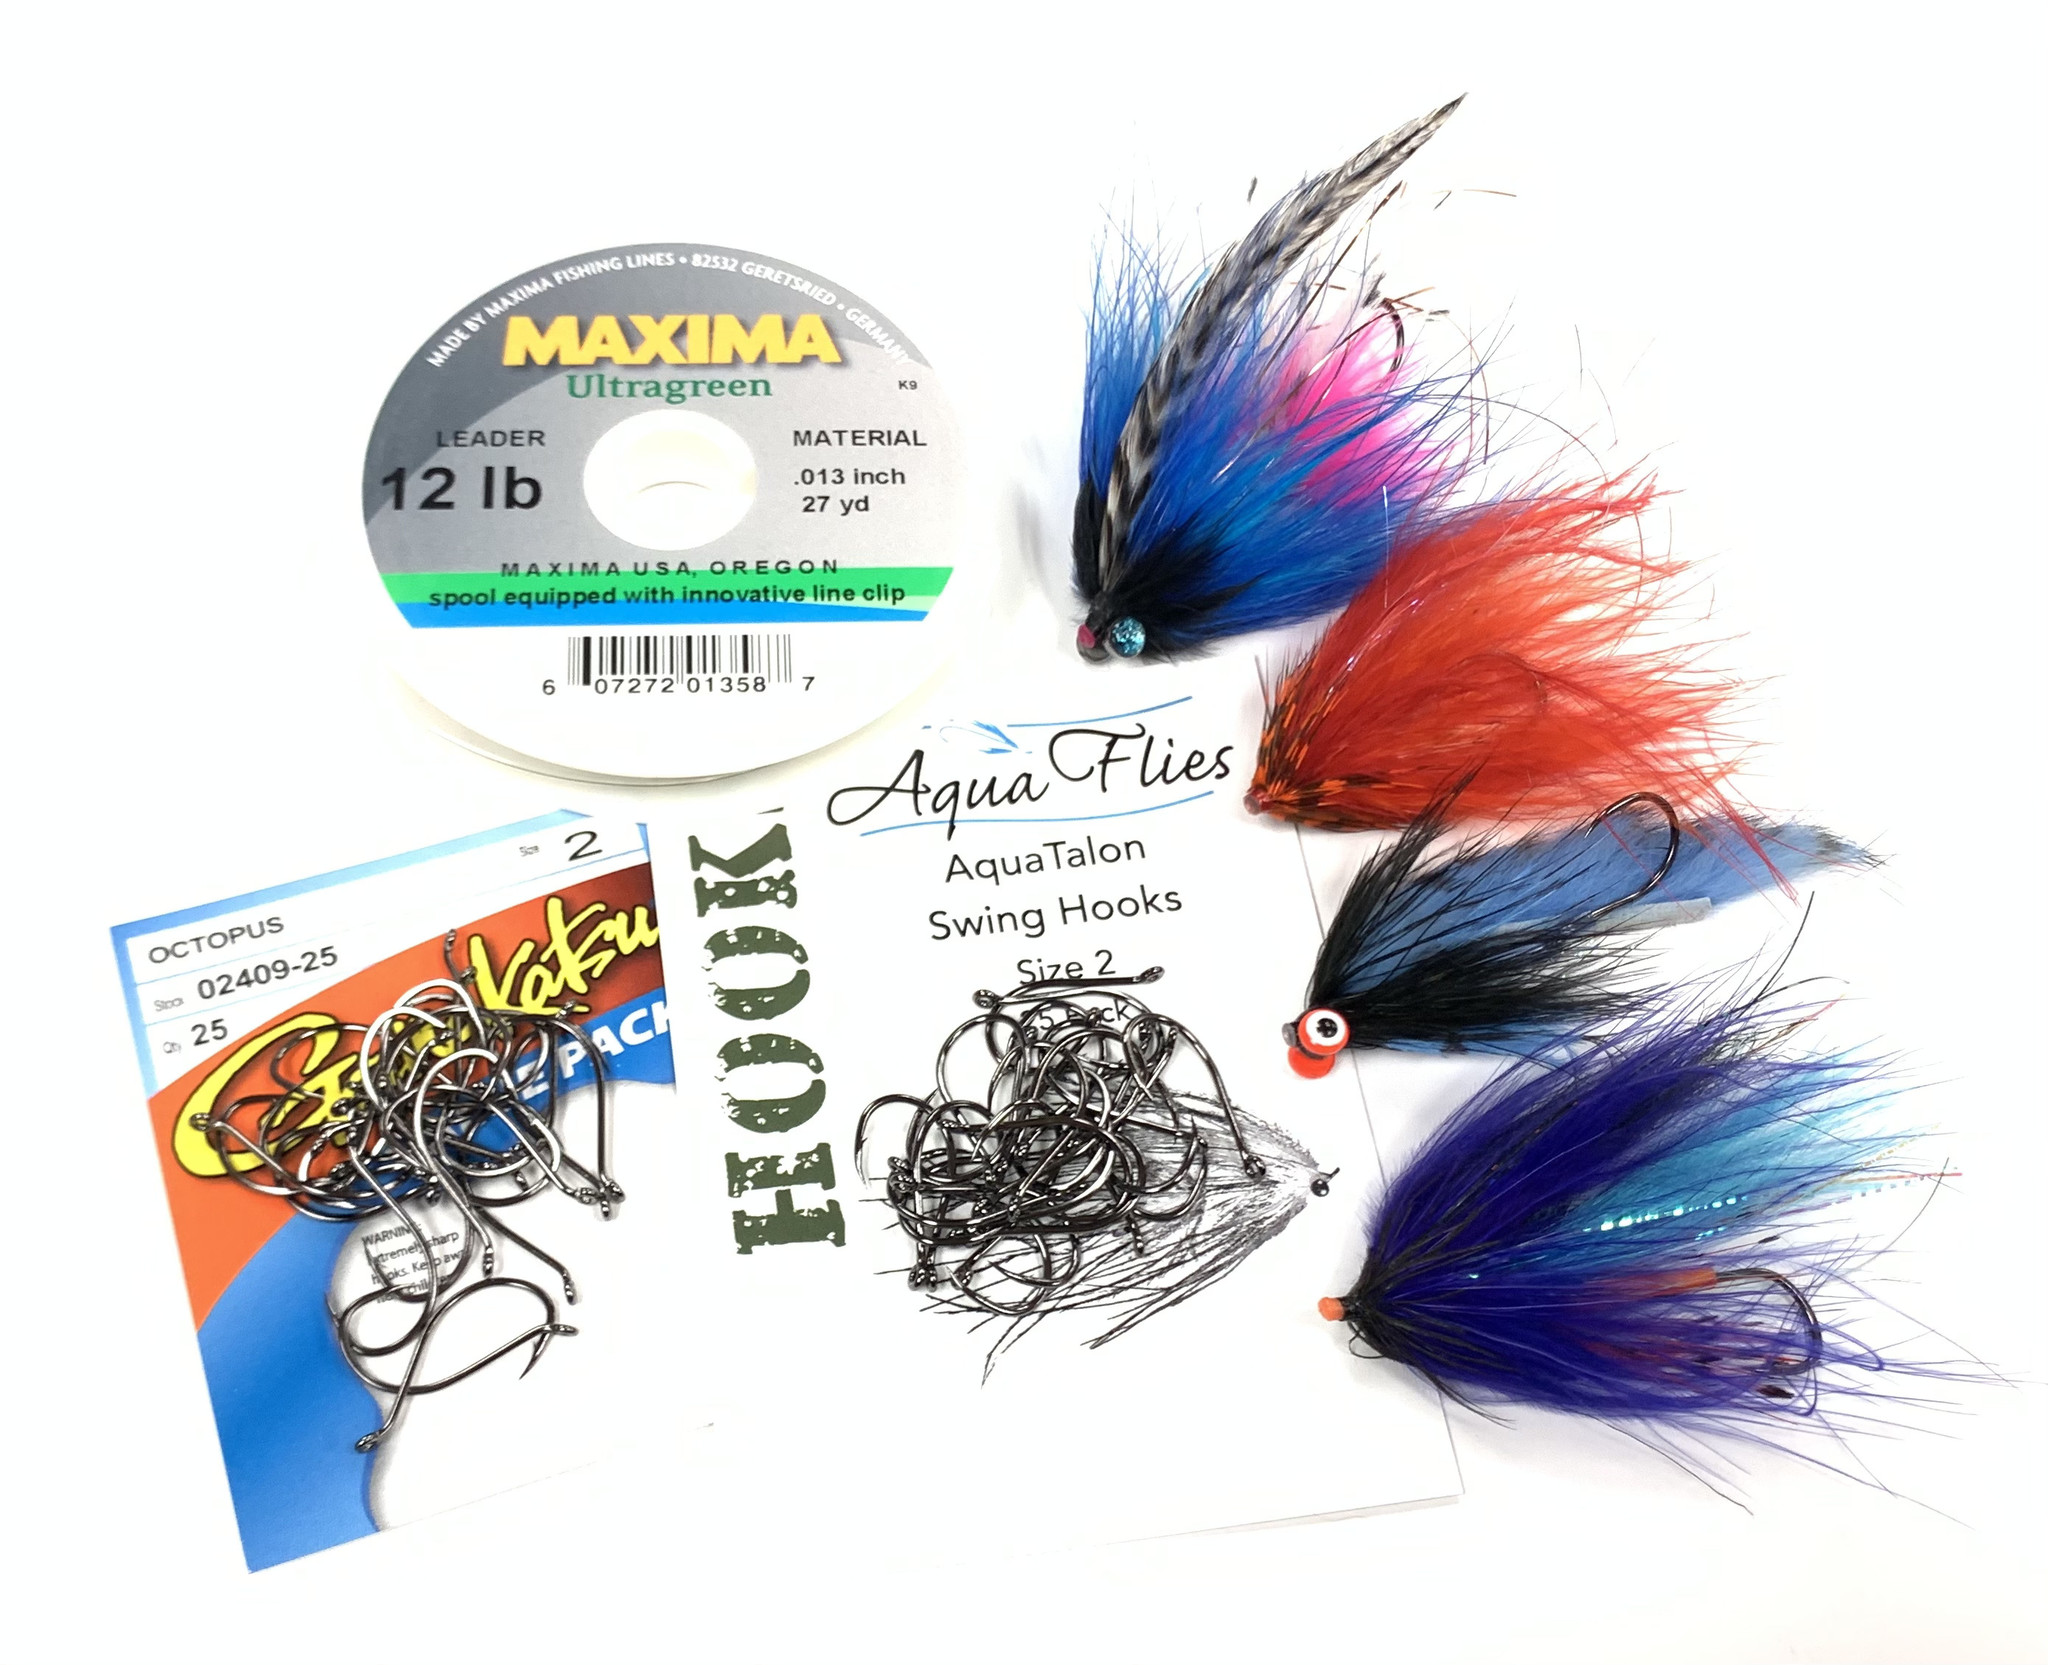 Latest Fly Fishing News and Reports - Rigging Tube Flies - Royal Treatment  Fly Fishing